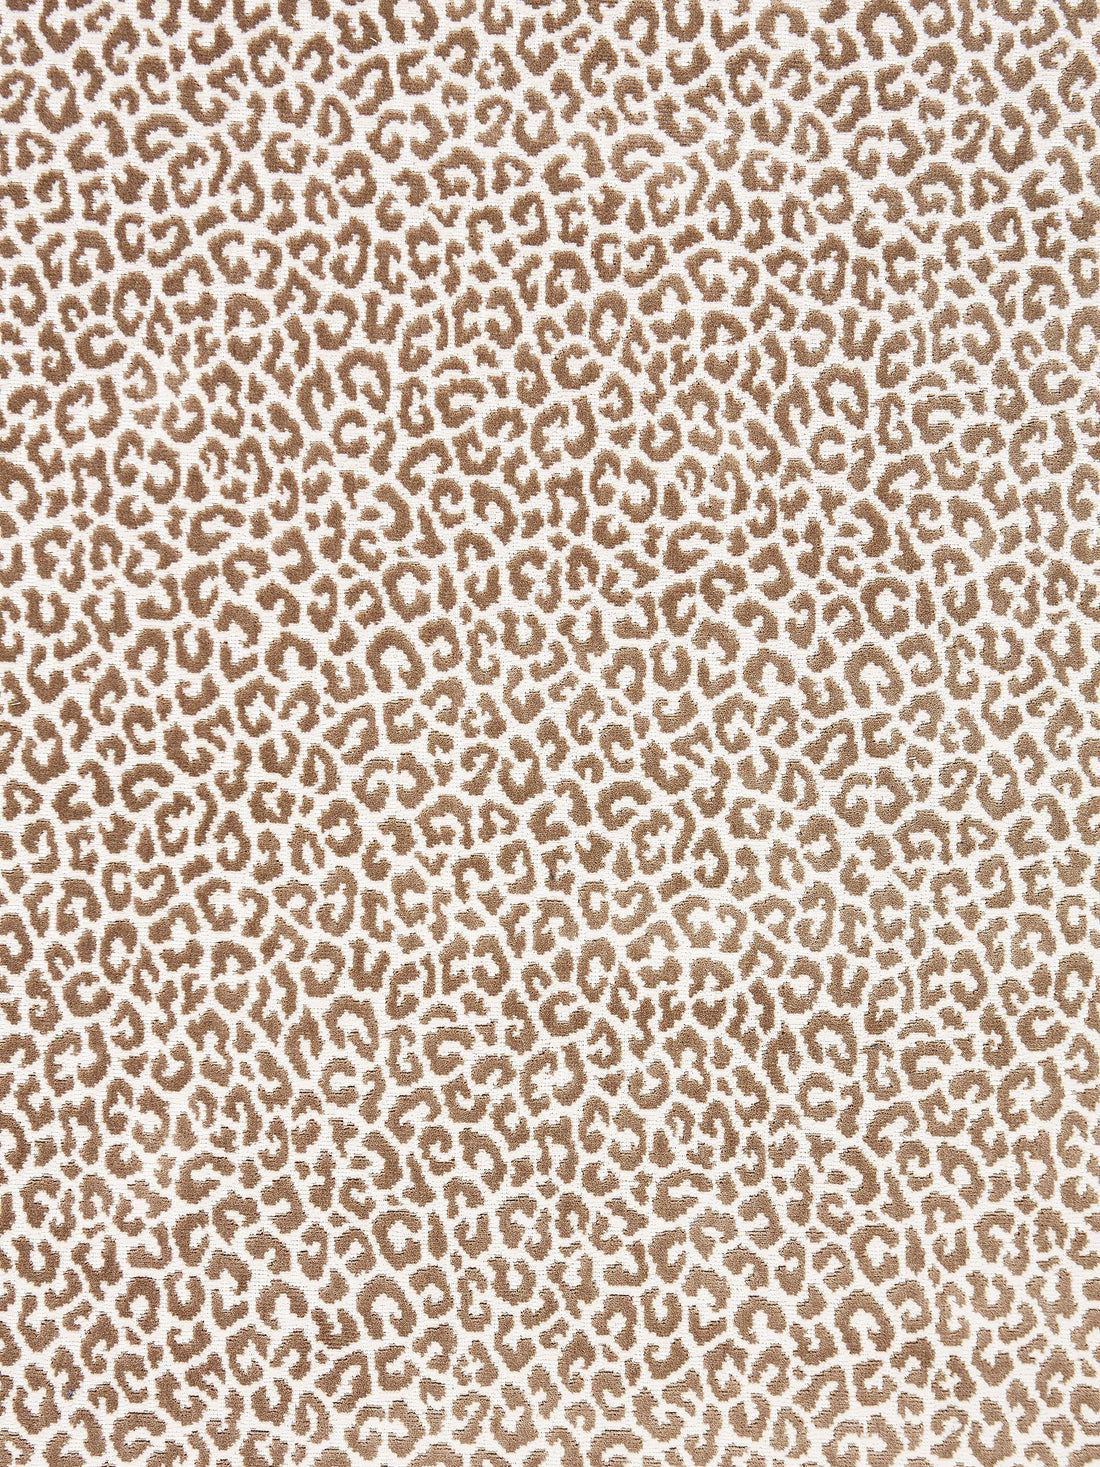 Panthera Velvet fabric in sable color - pattern number SC 000327037 - by Scalamandre in the Scalamandre Fabrics Book 1 collection